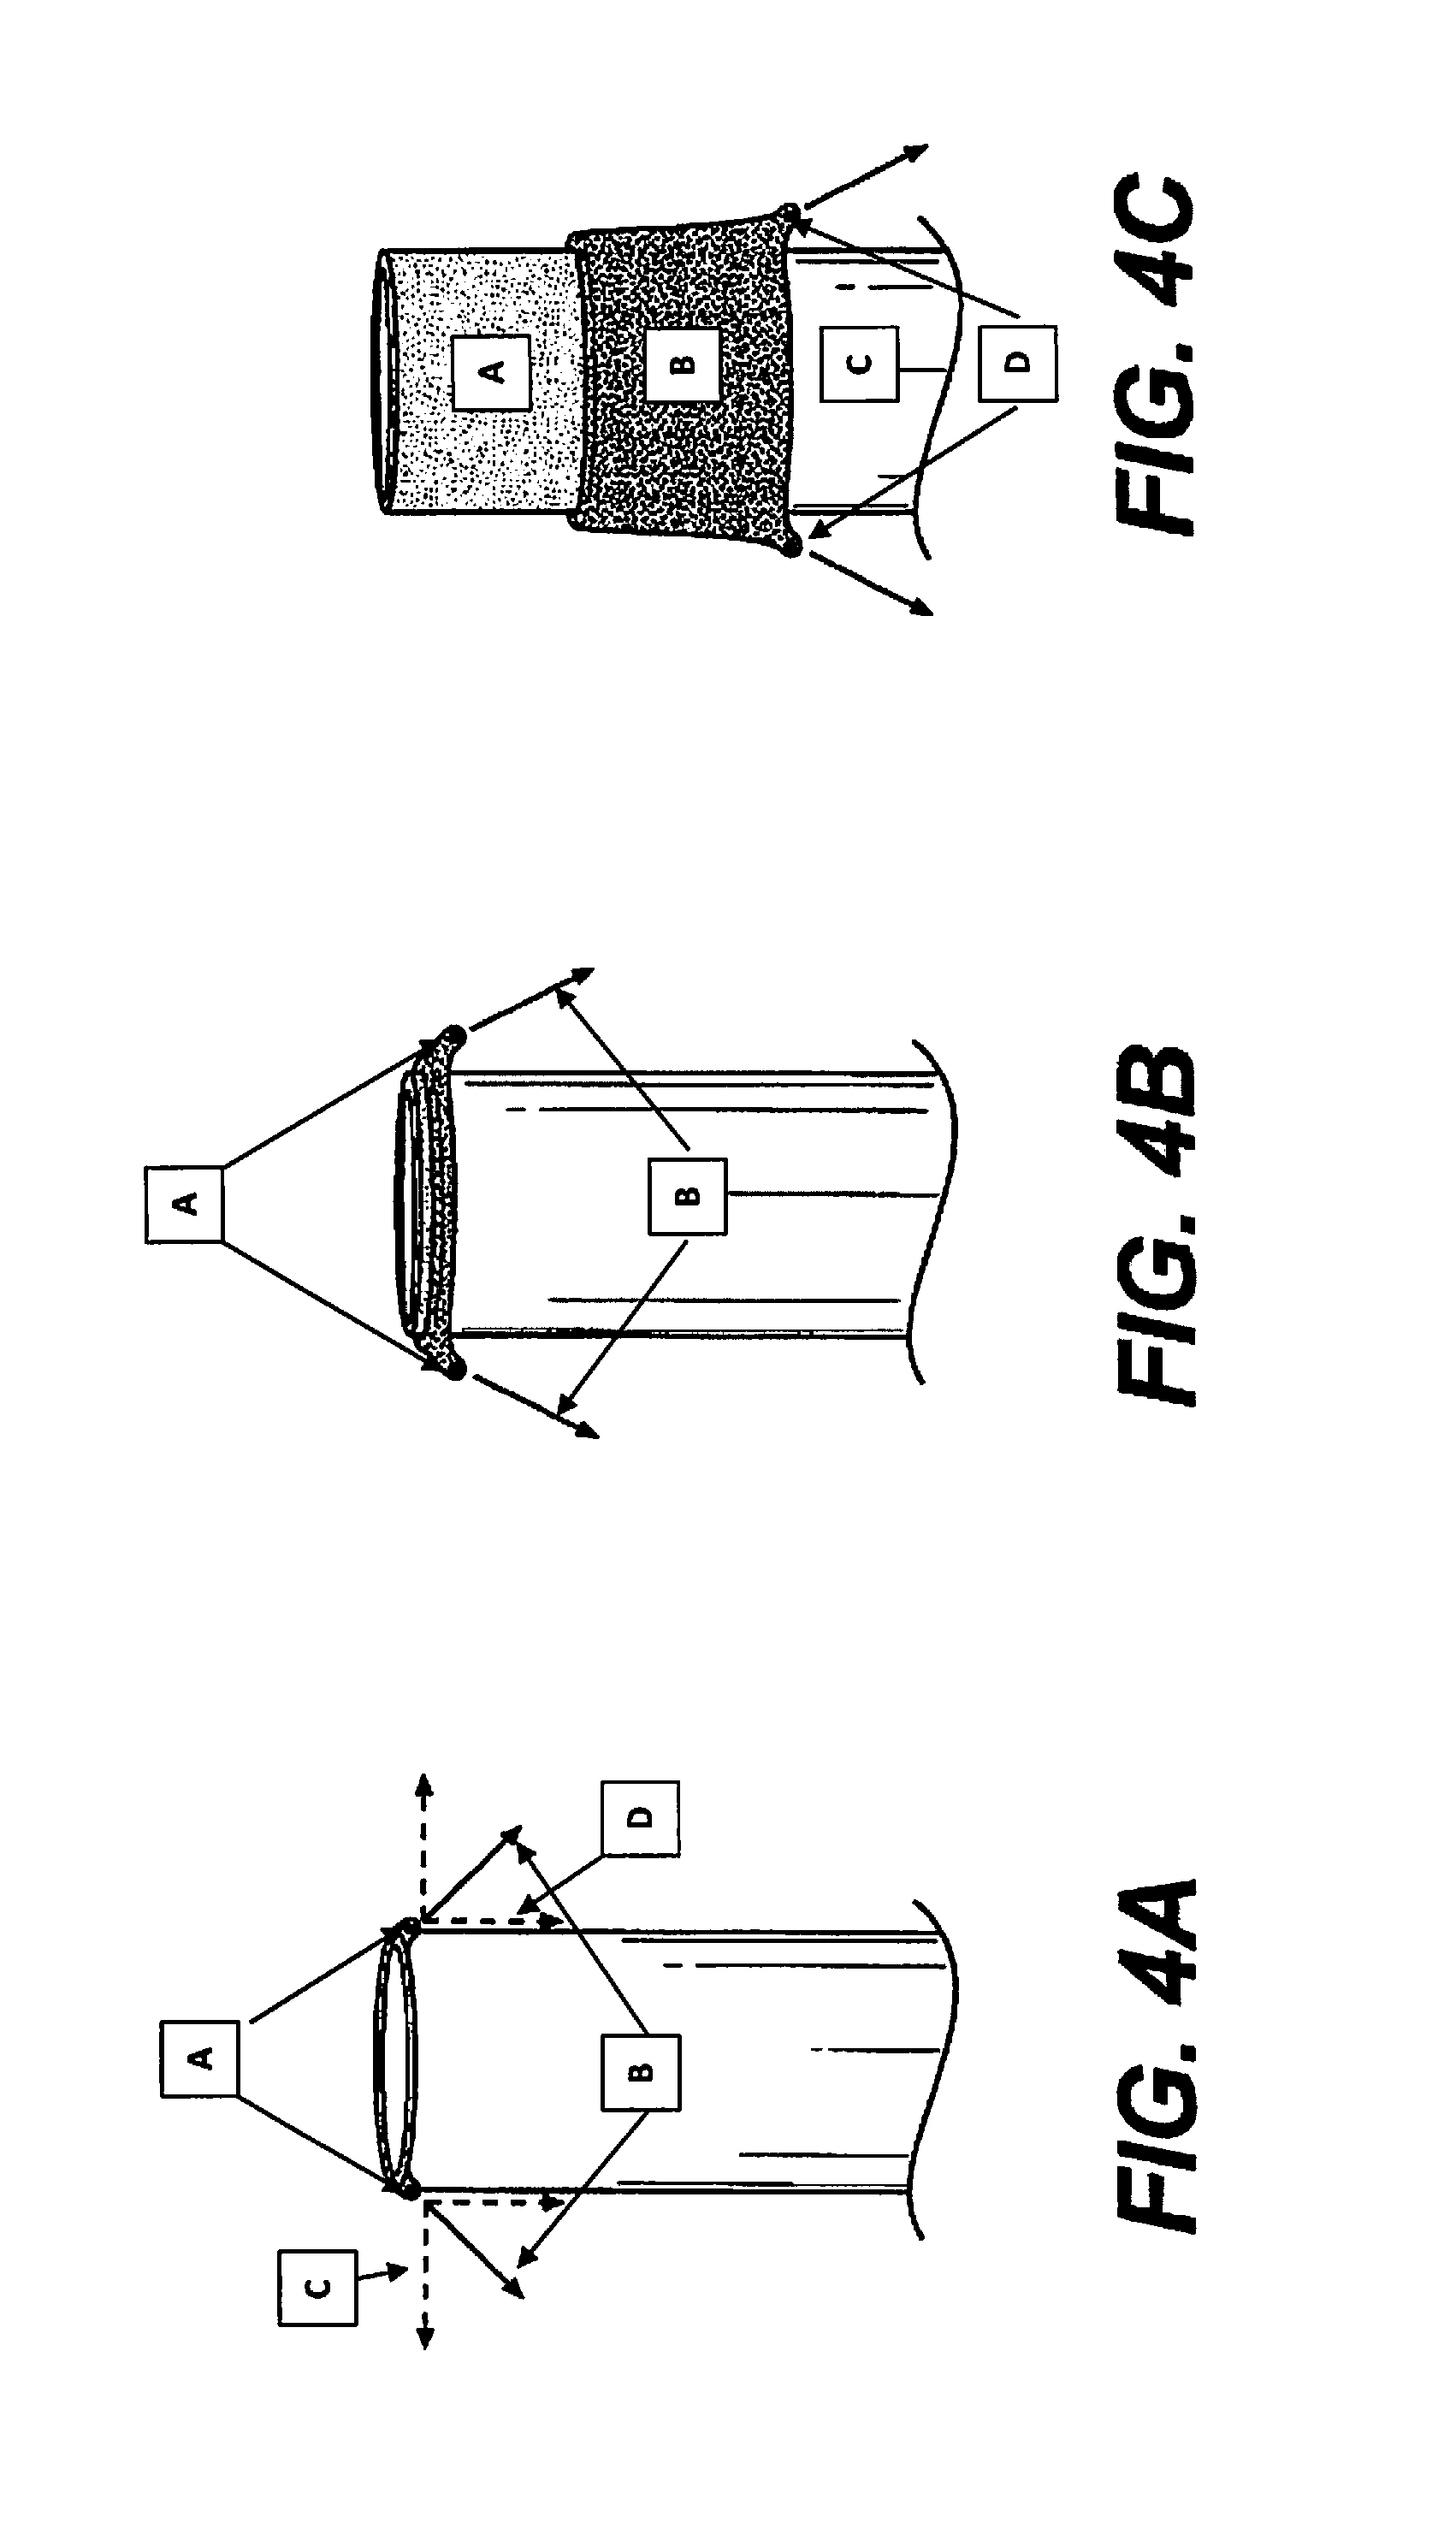 Compositions and Methods for Preventing and Ameliorating Fouling on Medical Surfaces